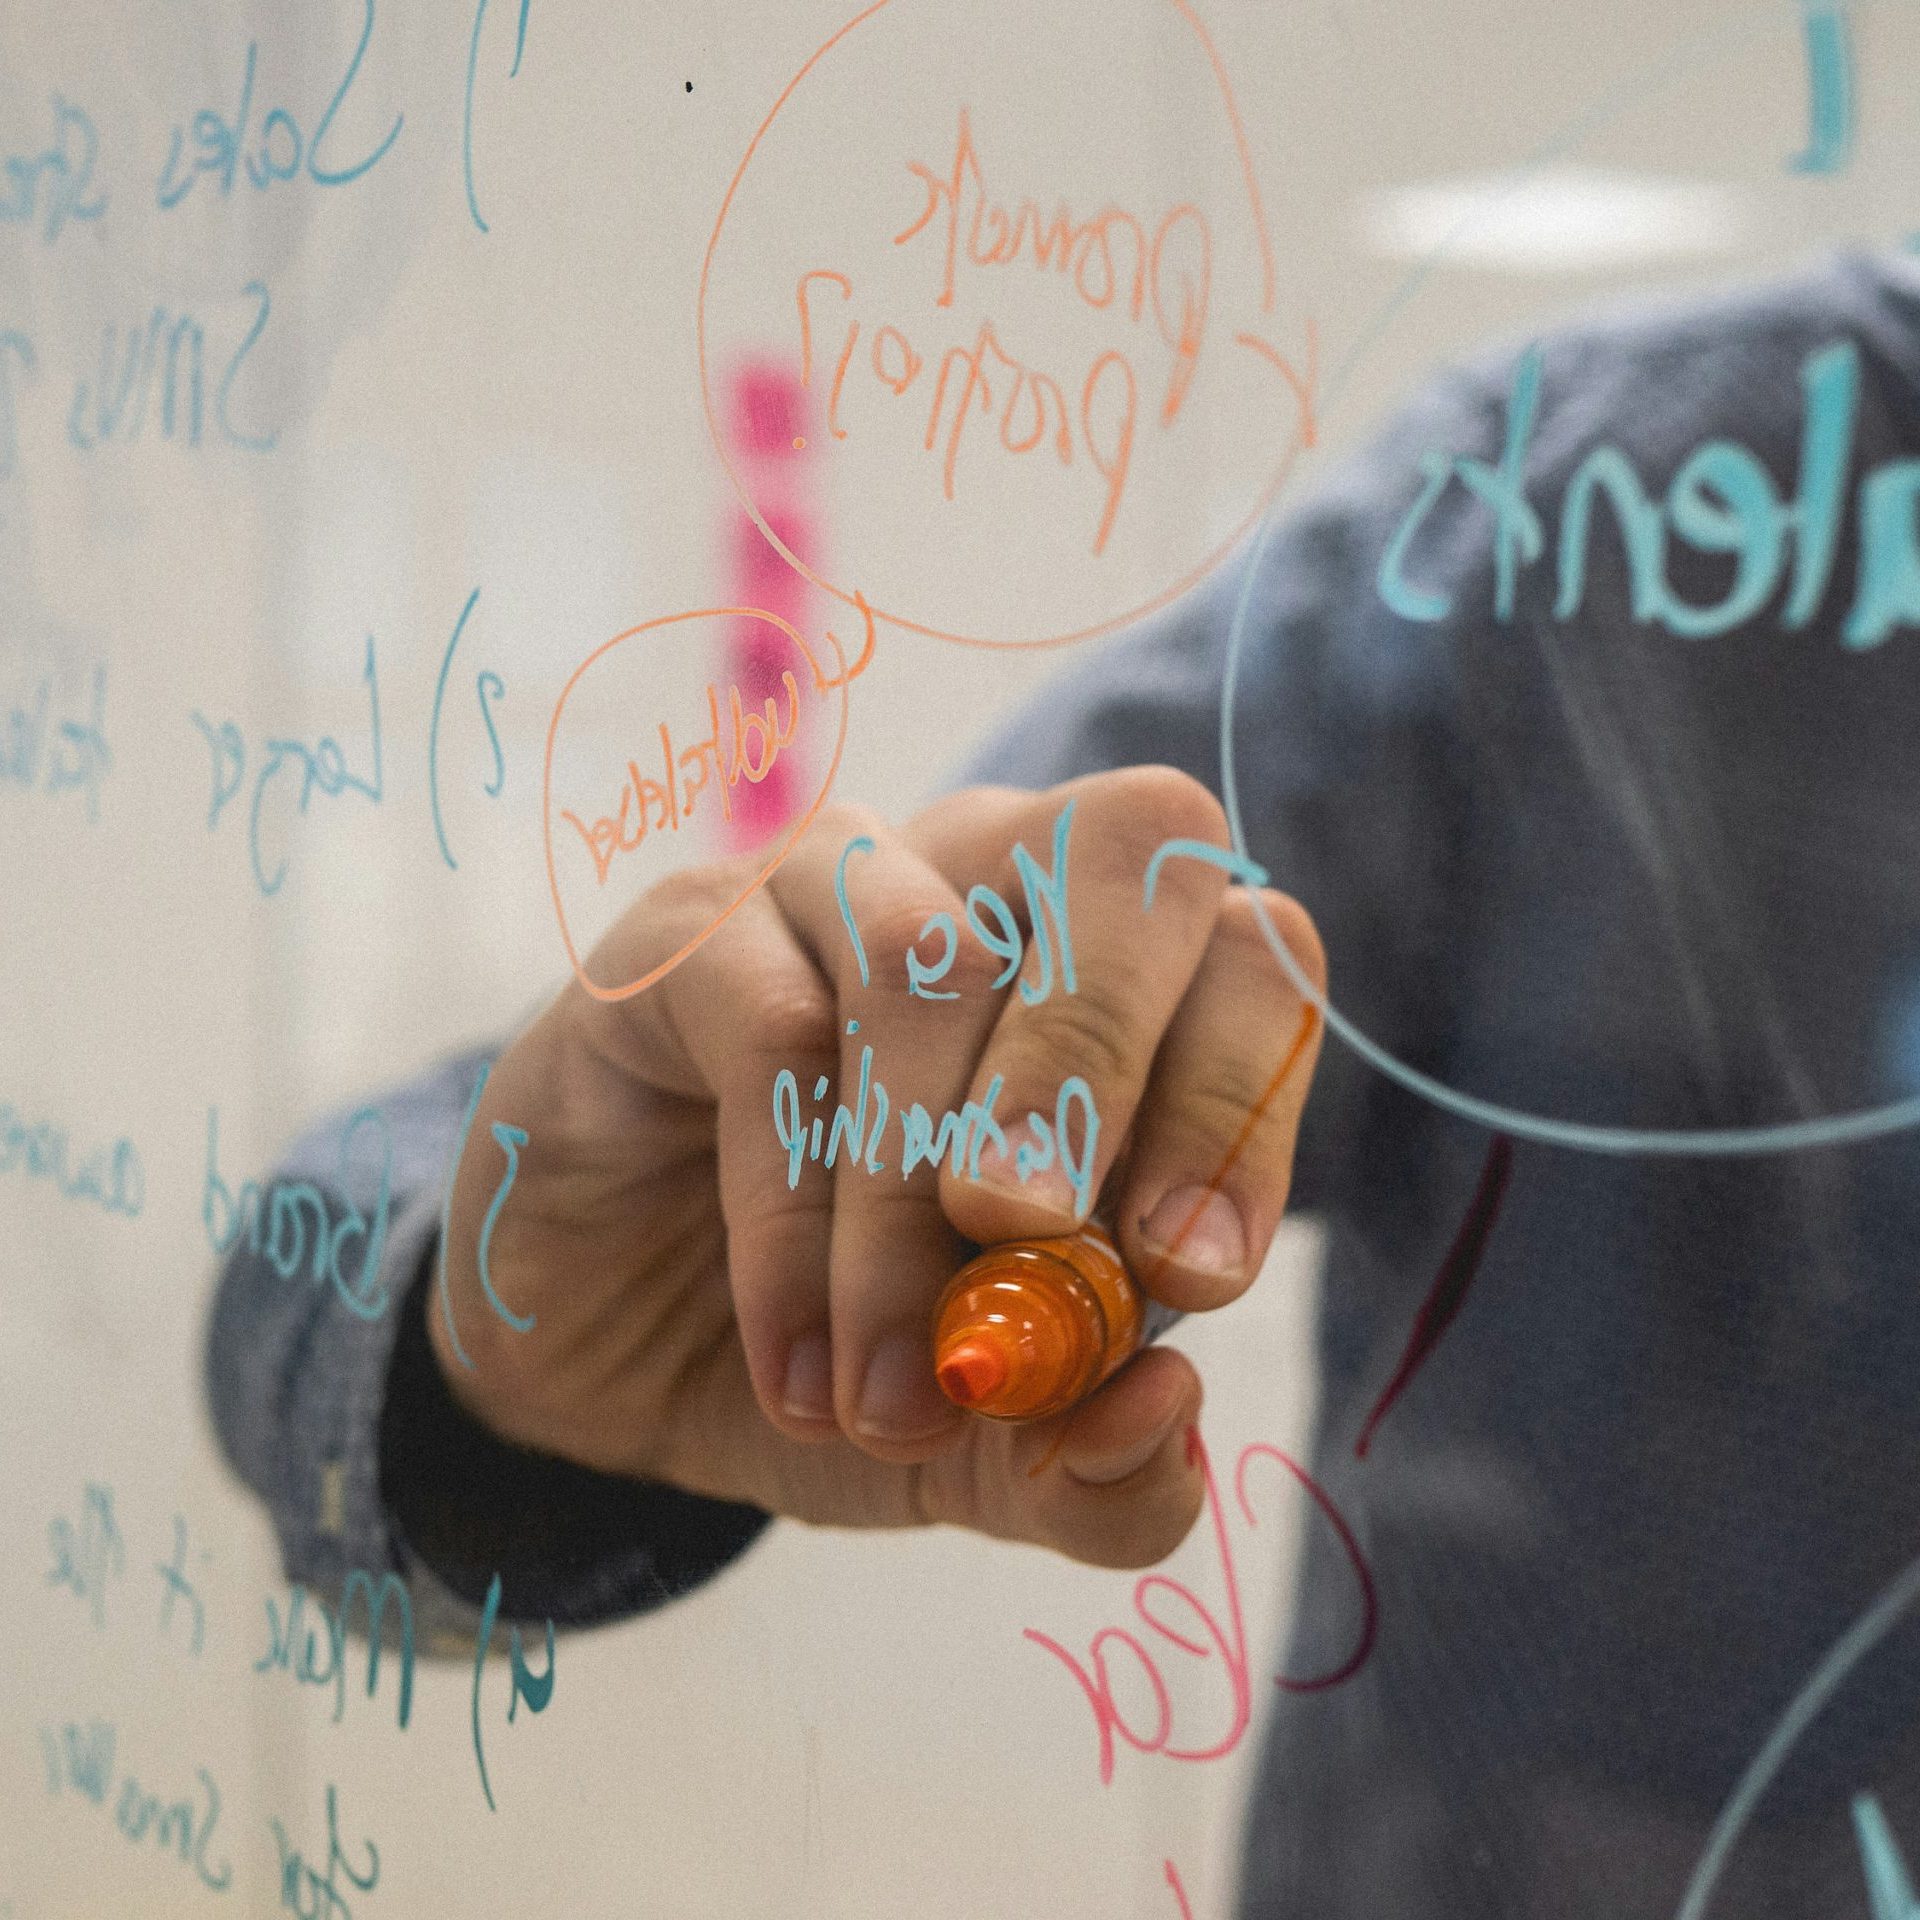 Person from IoT innovation consultancy writing on a glass board with a red marker, viewed from behind the glass.